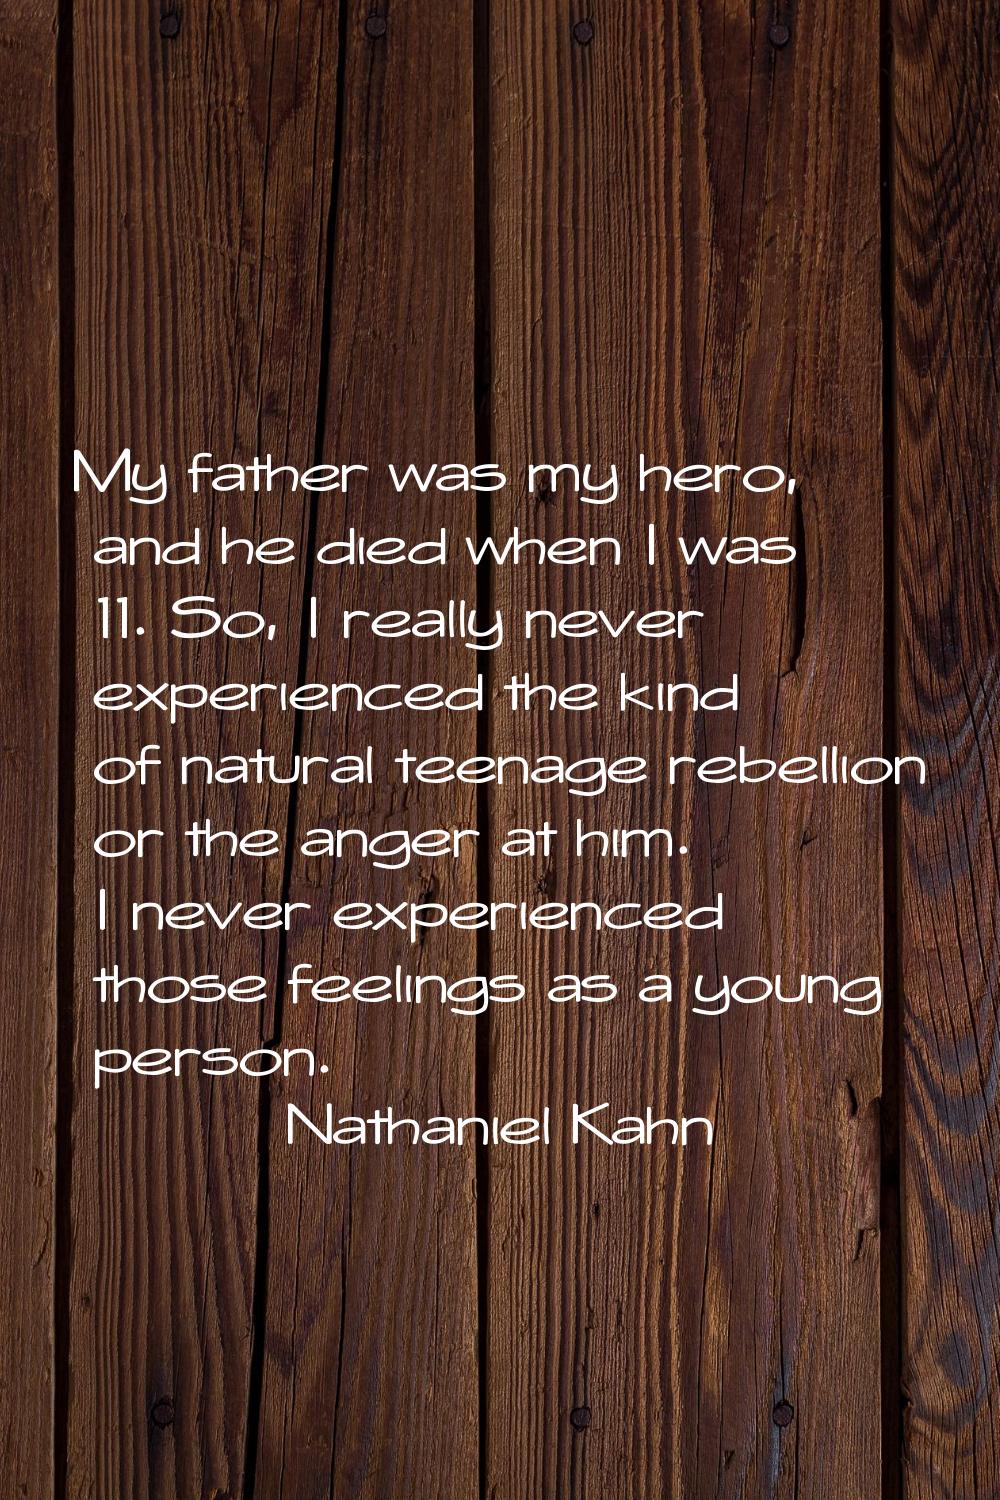 My father was my hero, and he died when I was 11. So, I really never experienced the kind of natura